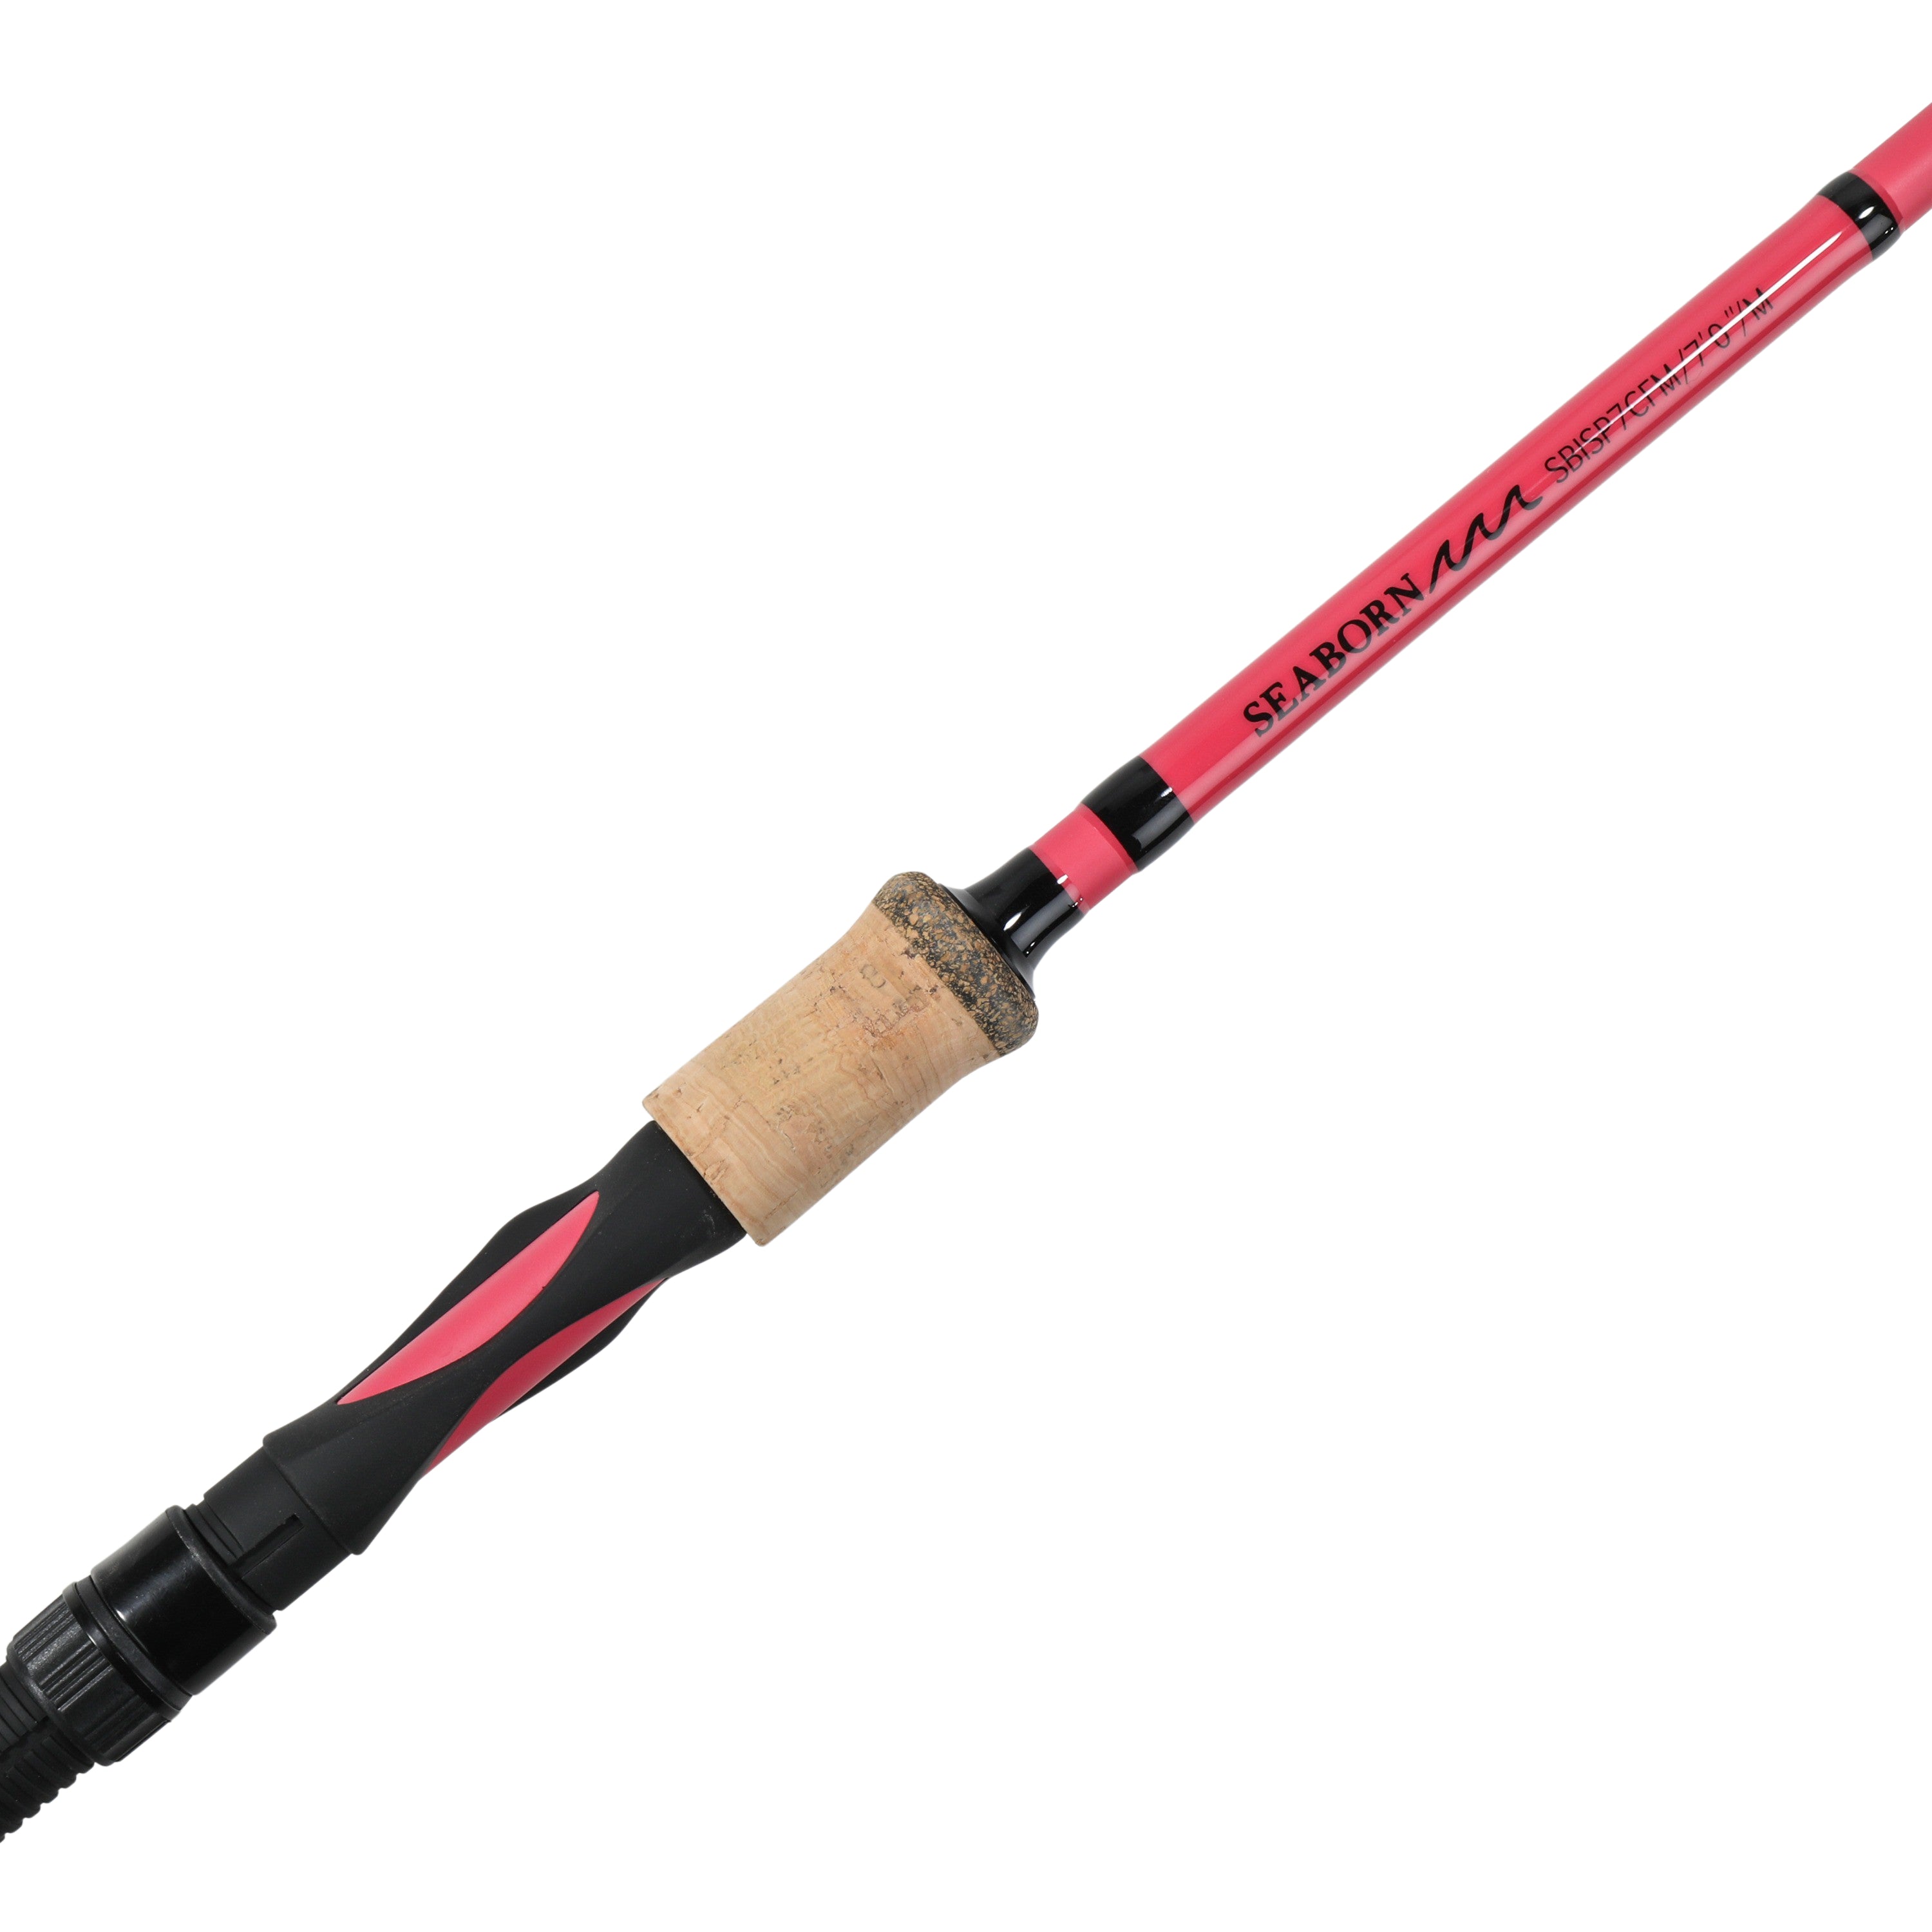 What's the best value spinning rod under $100 for inshore